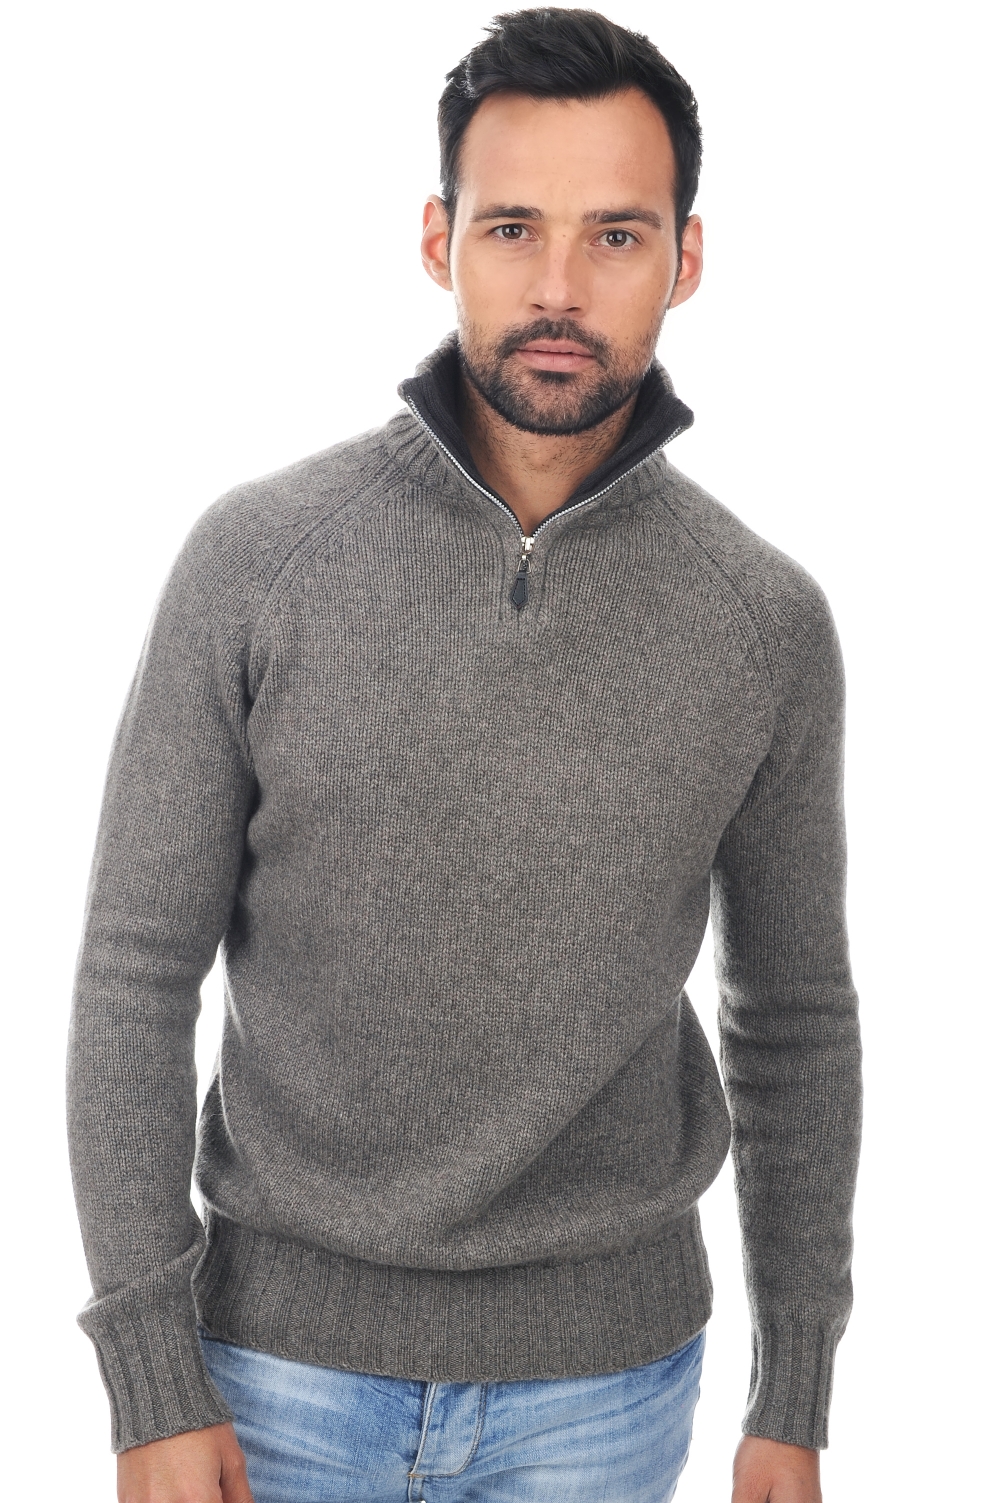 Cachemire pull homme epais olivier marmotte anthracite xl